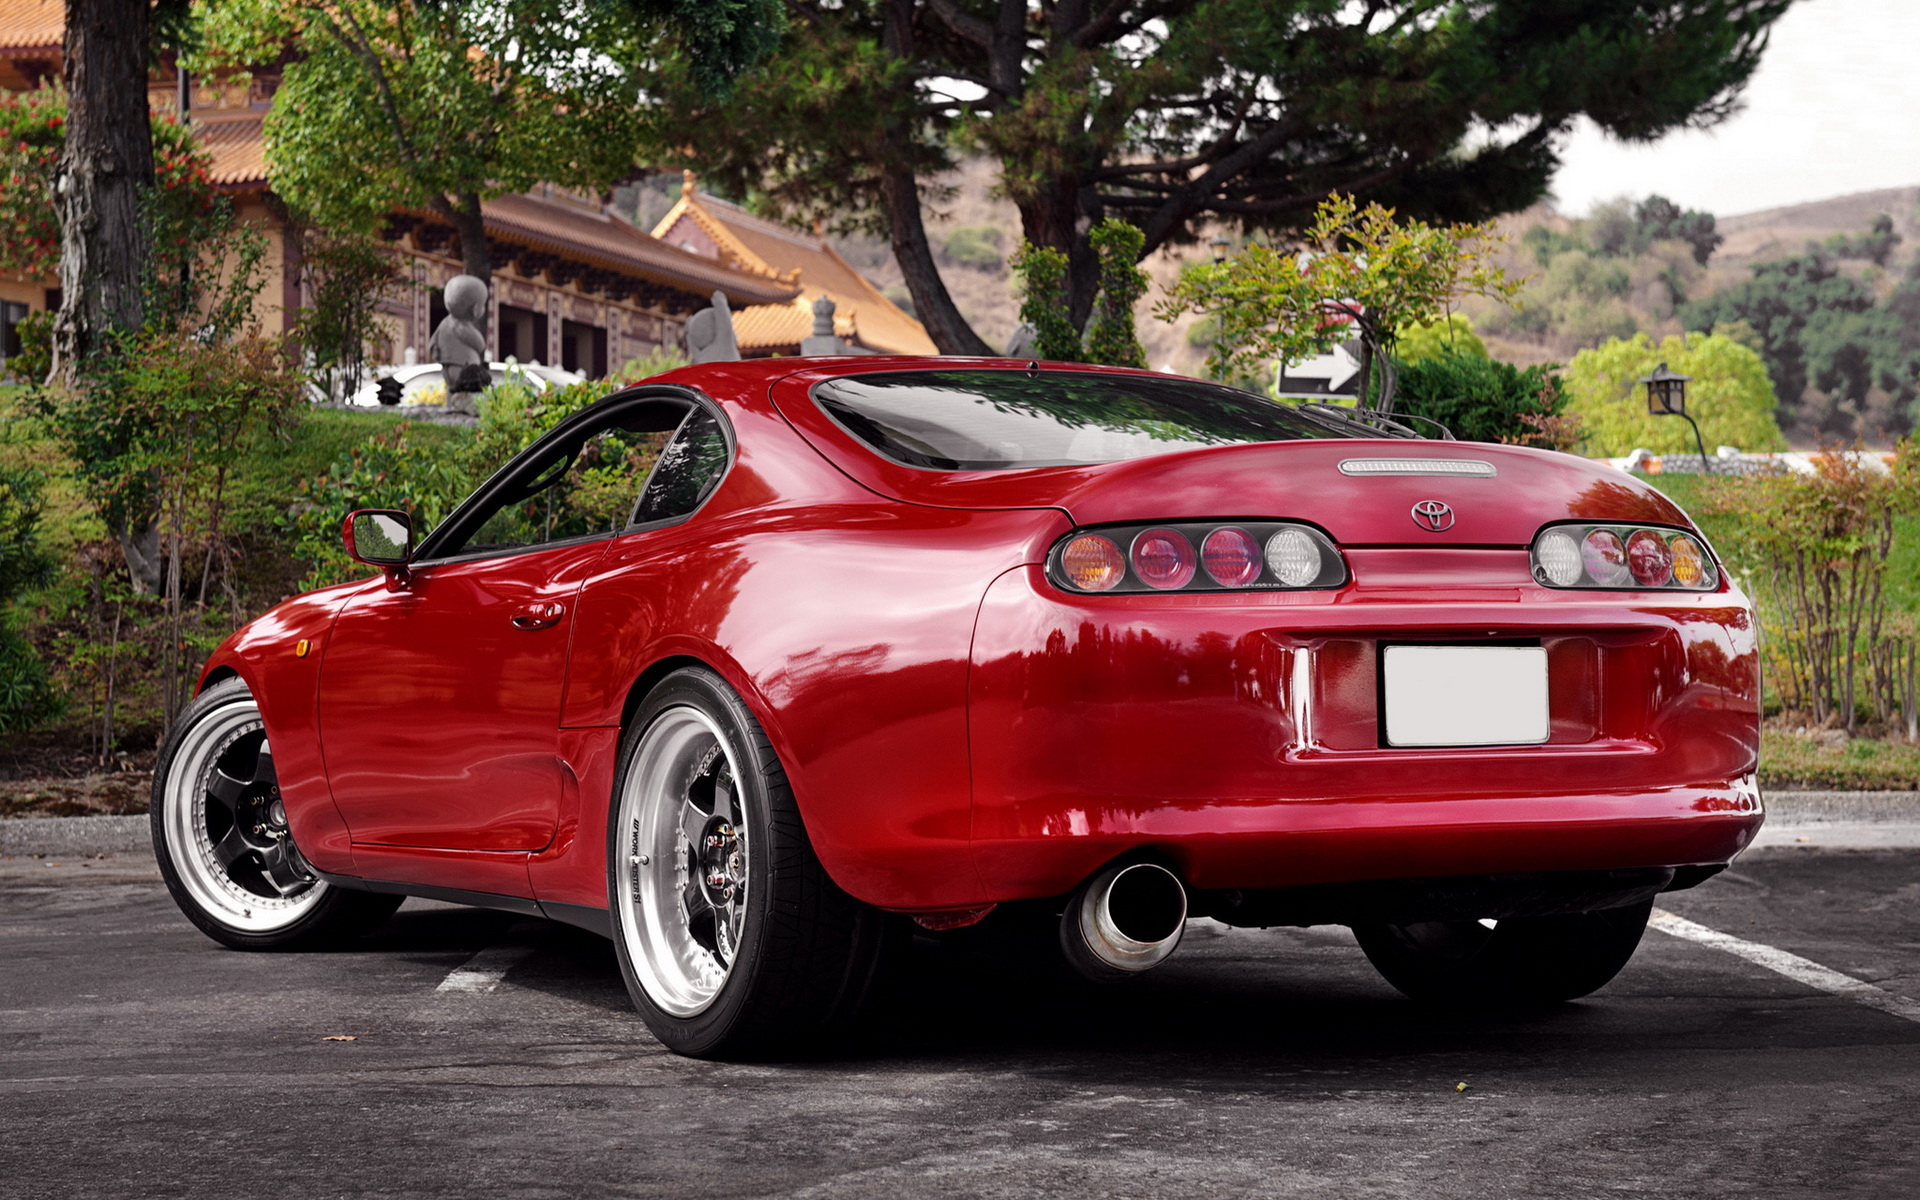  download Toyota Supra wallpapers and images wallpapers 1920x1200